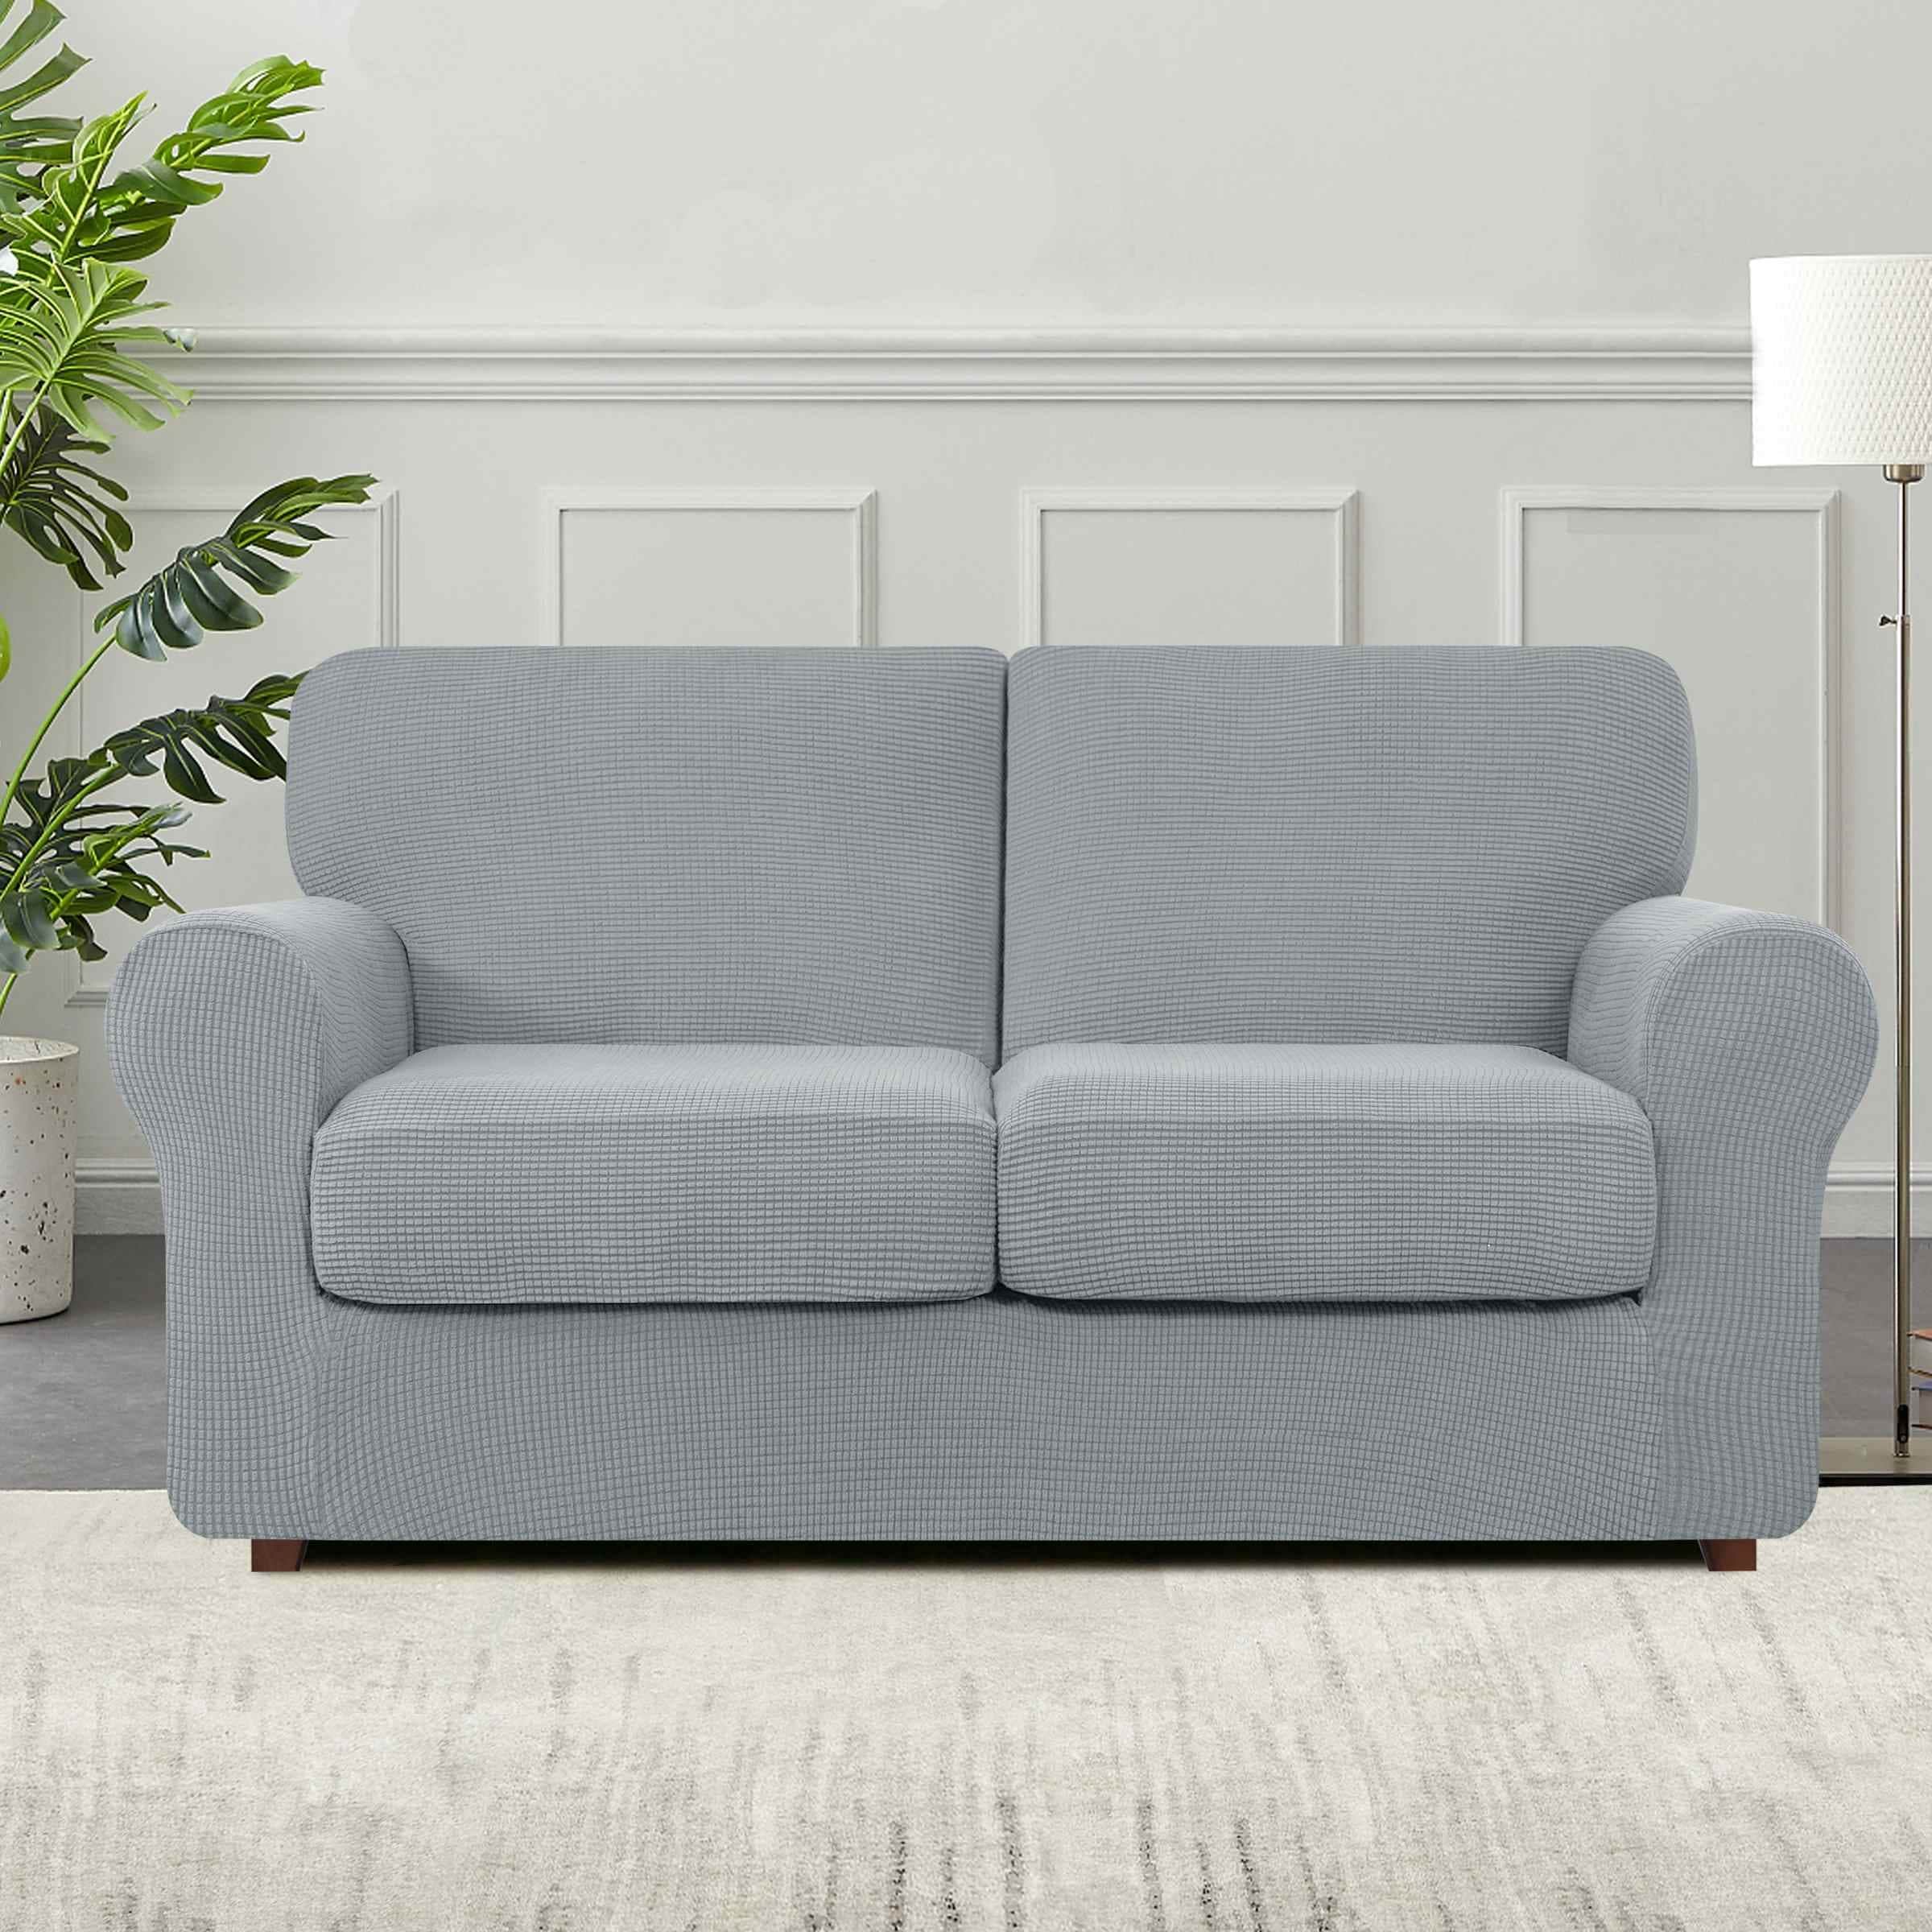 https://ak1.ostkcdn.com/images/products/is/images/direct/84c562e0abd4ccc423f3e190a39077b4635e07a6/Subrtex-9-Piece-Stretch-Sofa-Slipcover-Sets-with-4-Backrest-Cushion-Covers-and-4-Seat-Cushion-Covers.jpg